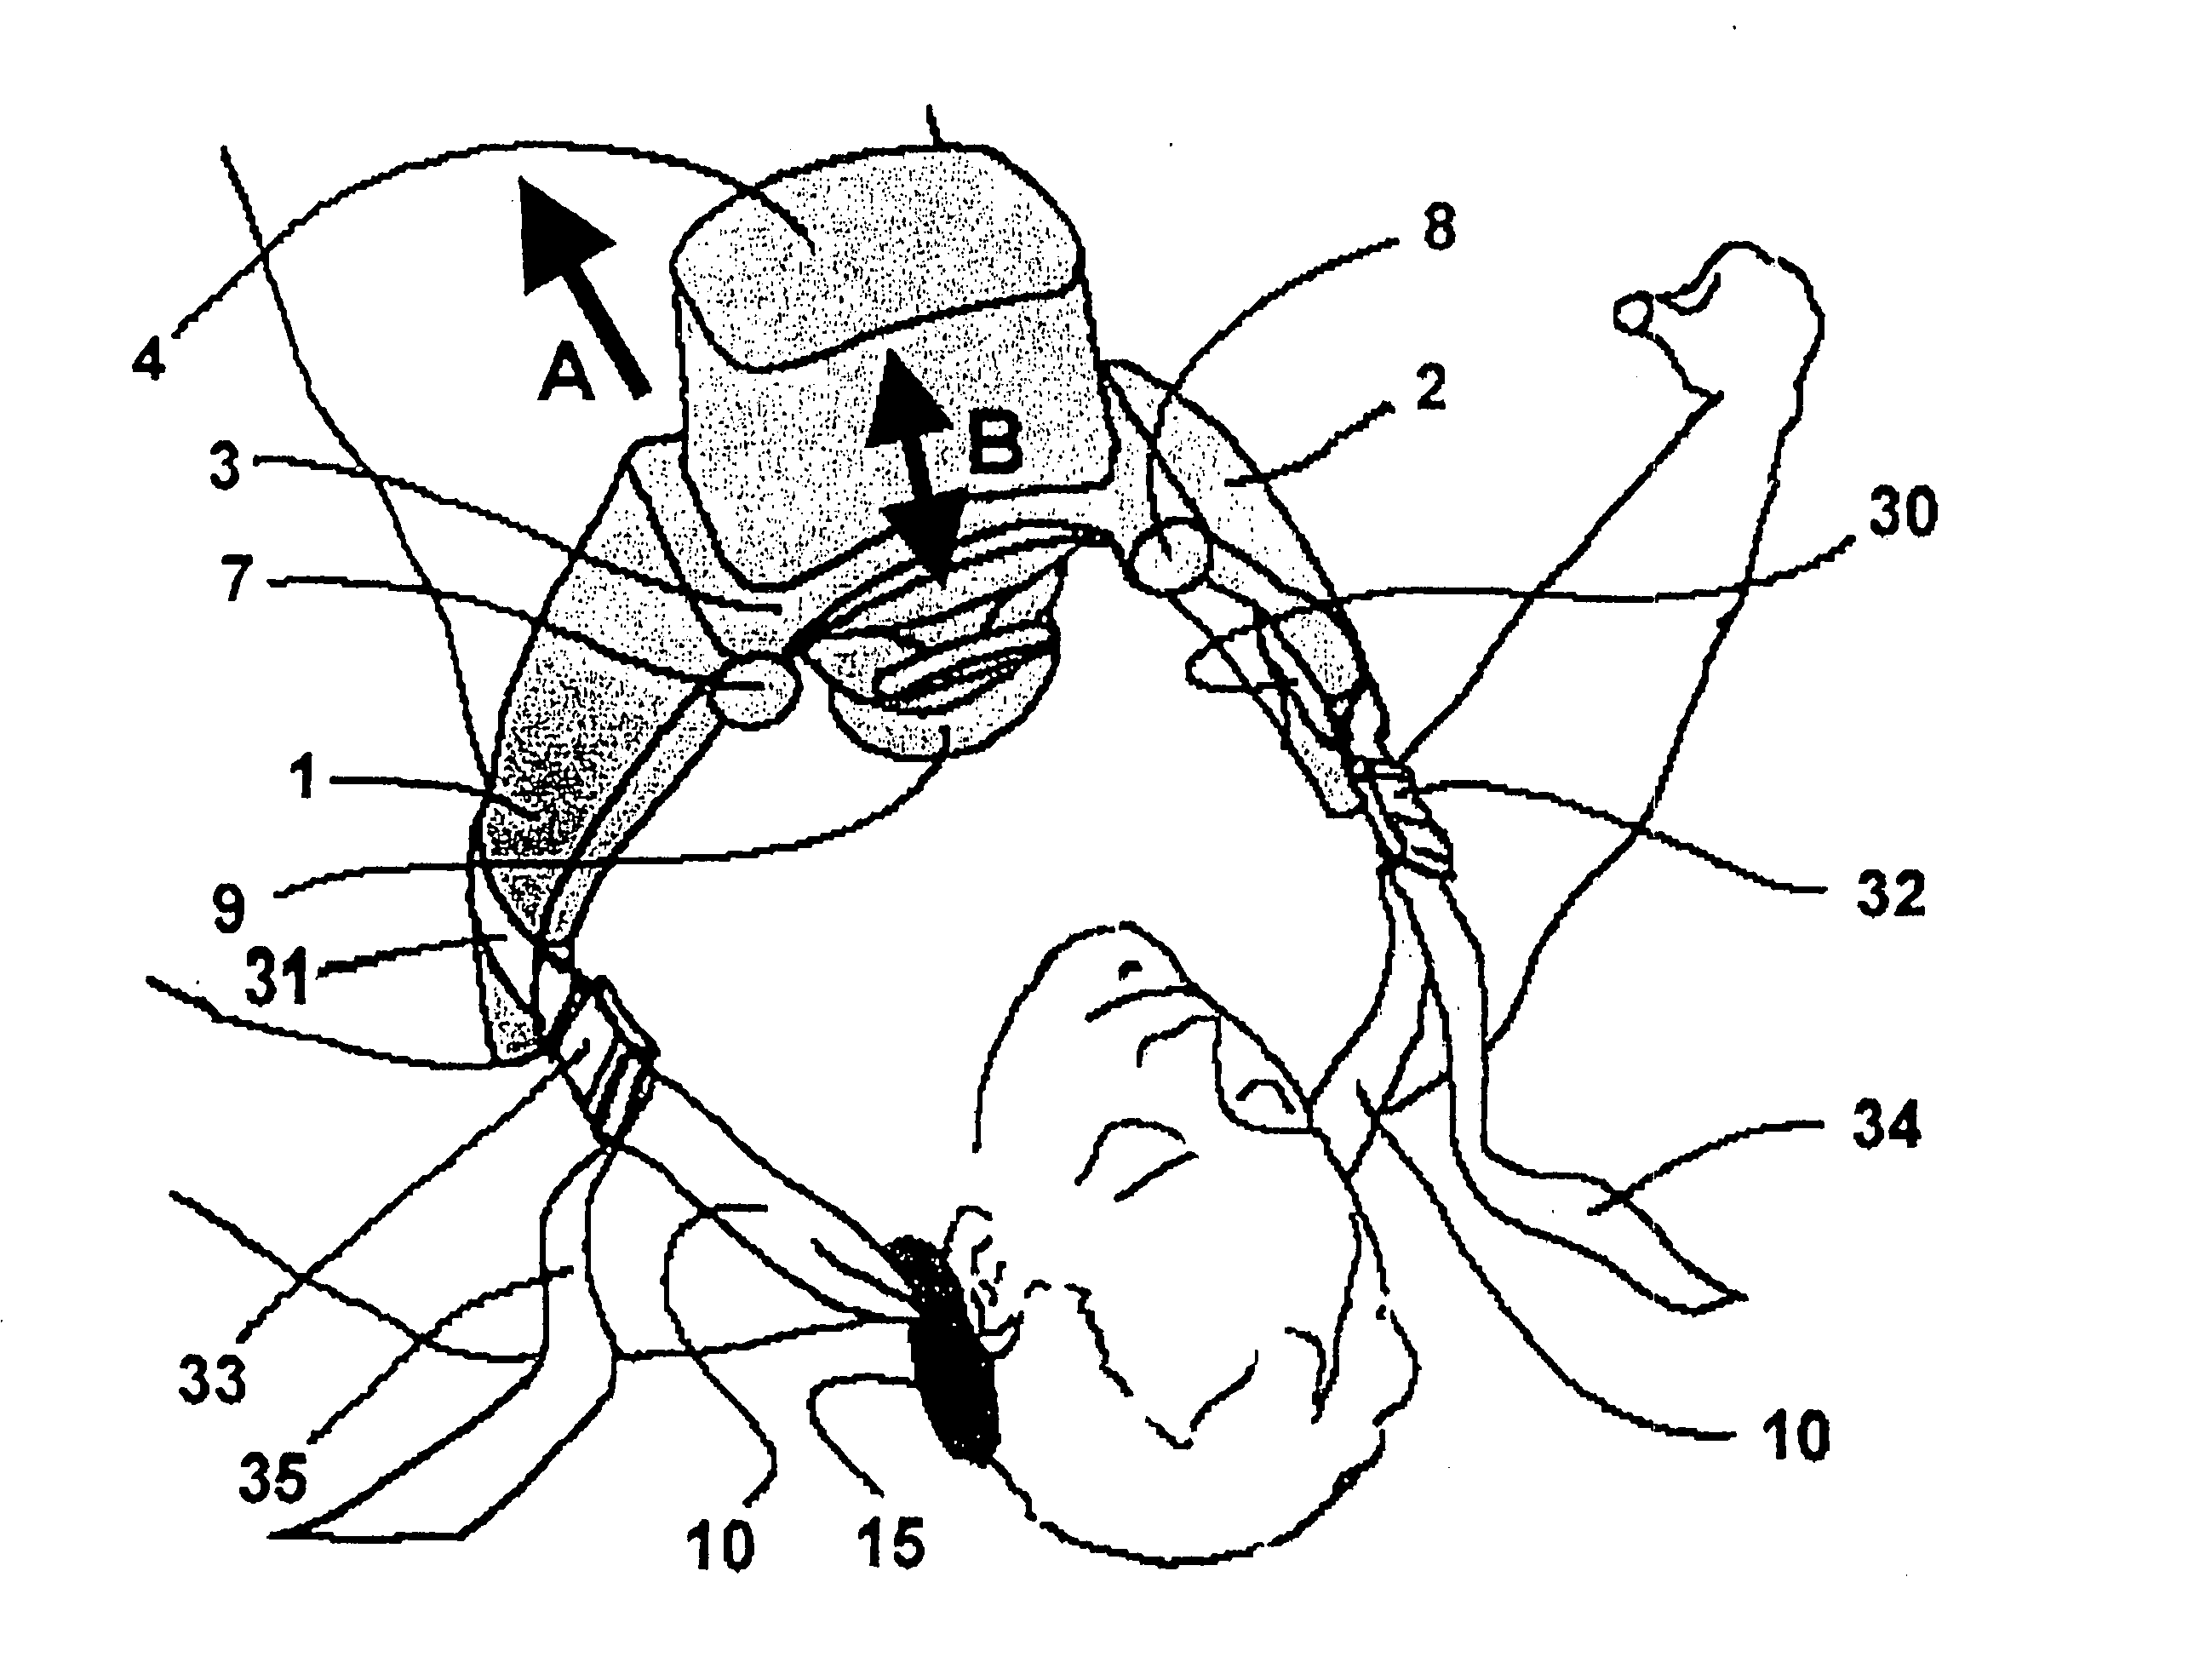 Positioning device for use in apparatus for treating sudden cardiac arrest